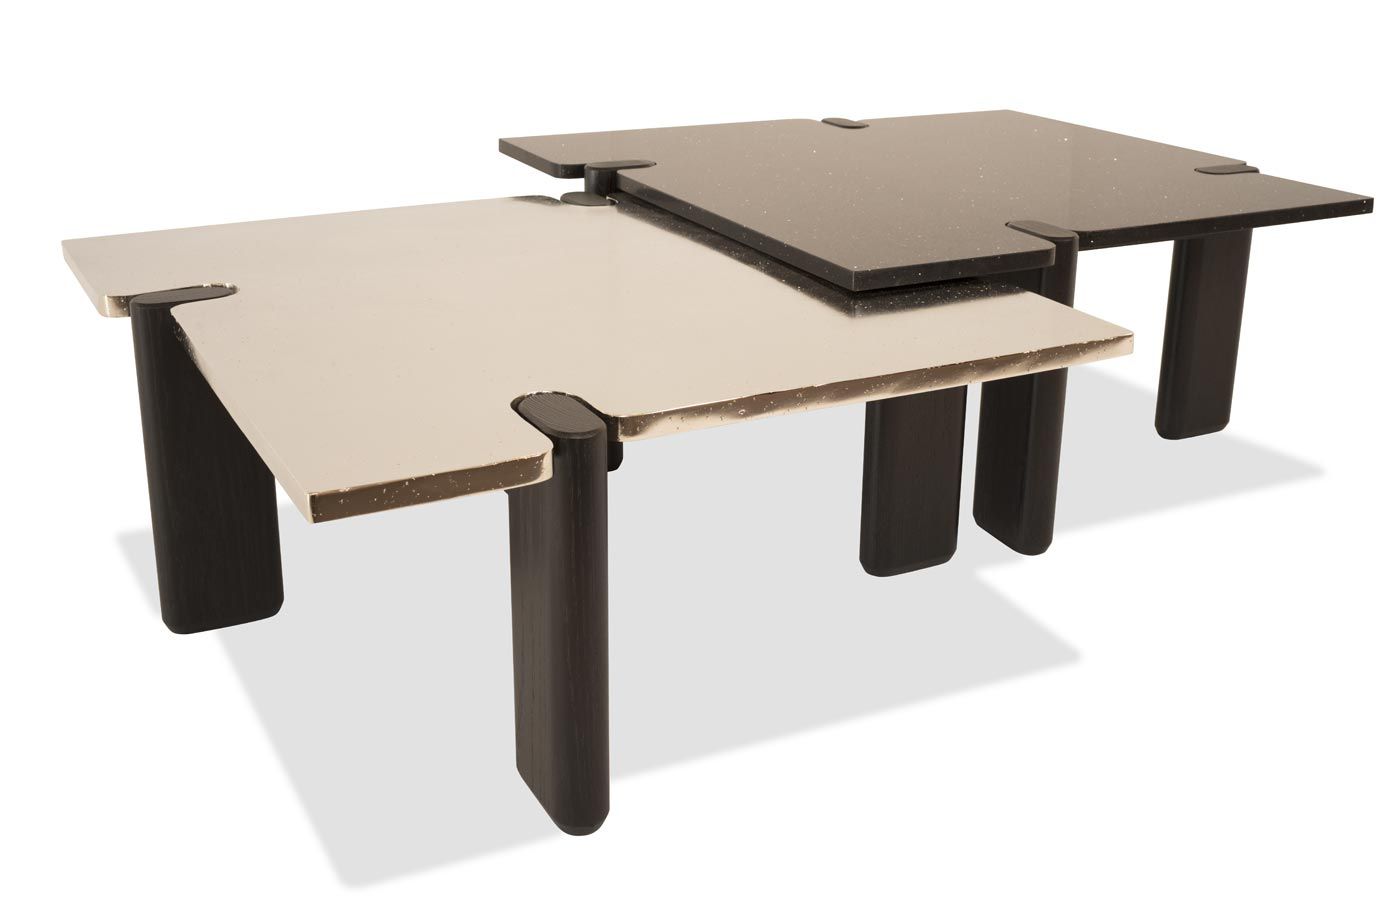 Persol Nesting Square Cocktail Tables | Rene Cazares With Nesting Cocktail Tables (View 12 of 15)